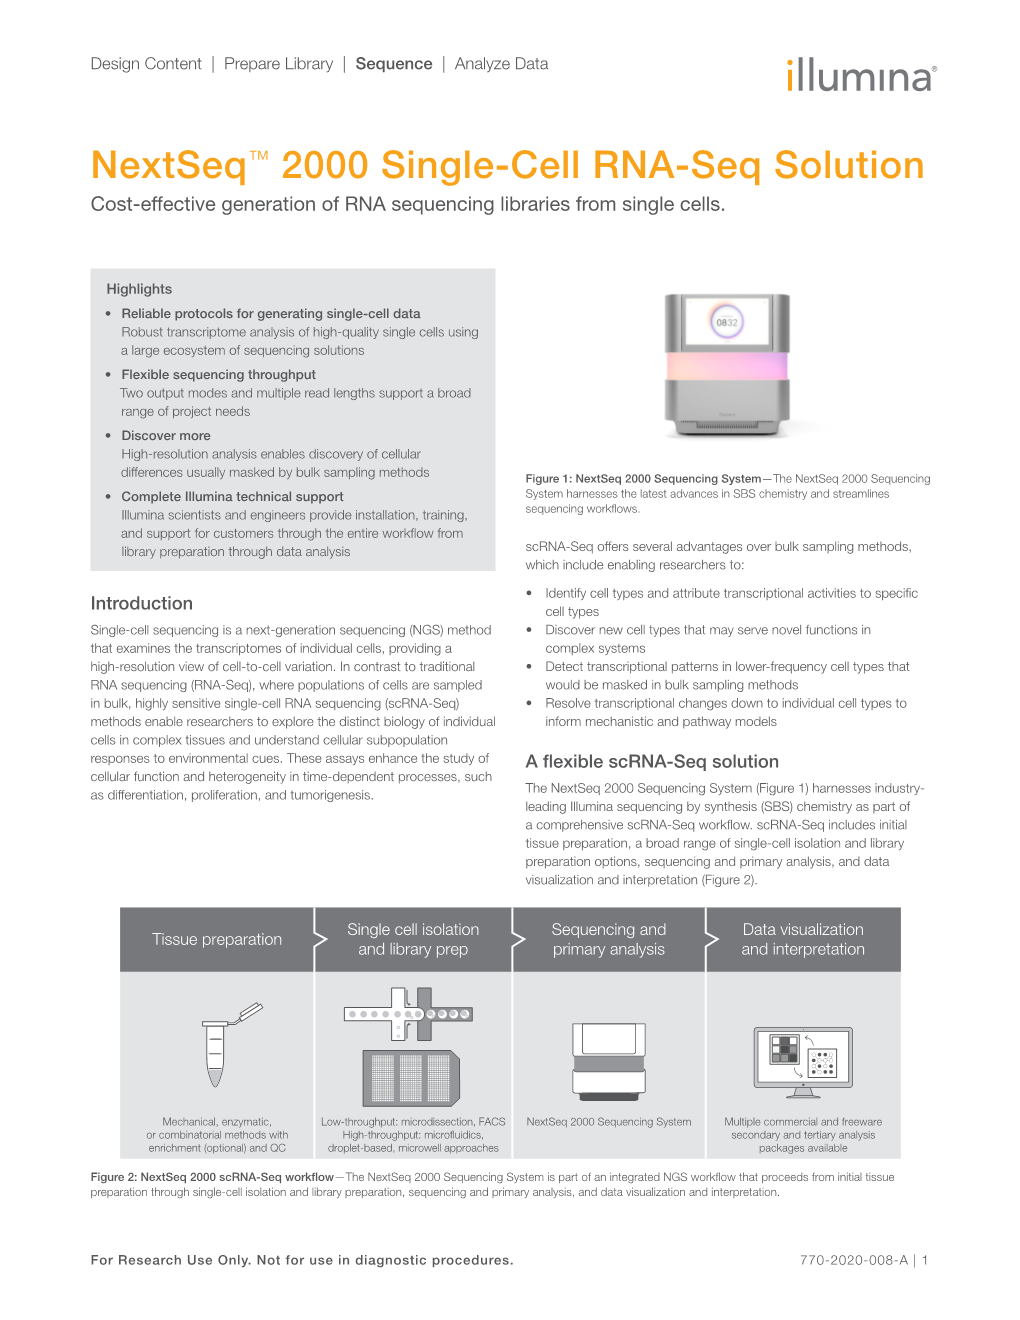 Nextseq™ 2000 Single-Cell RNA-Seq Solution Cost-Effective Generation of RNA Sequencing Libraries from Single Cells